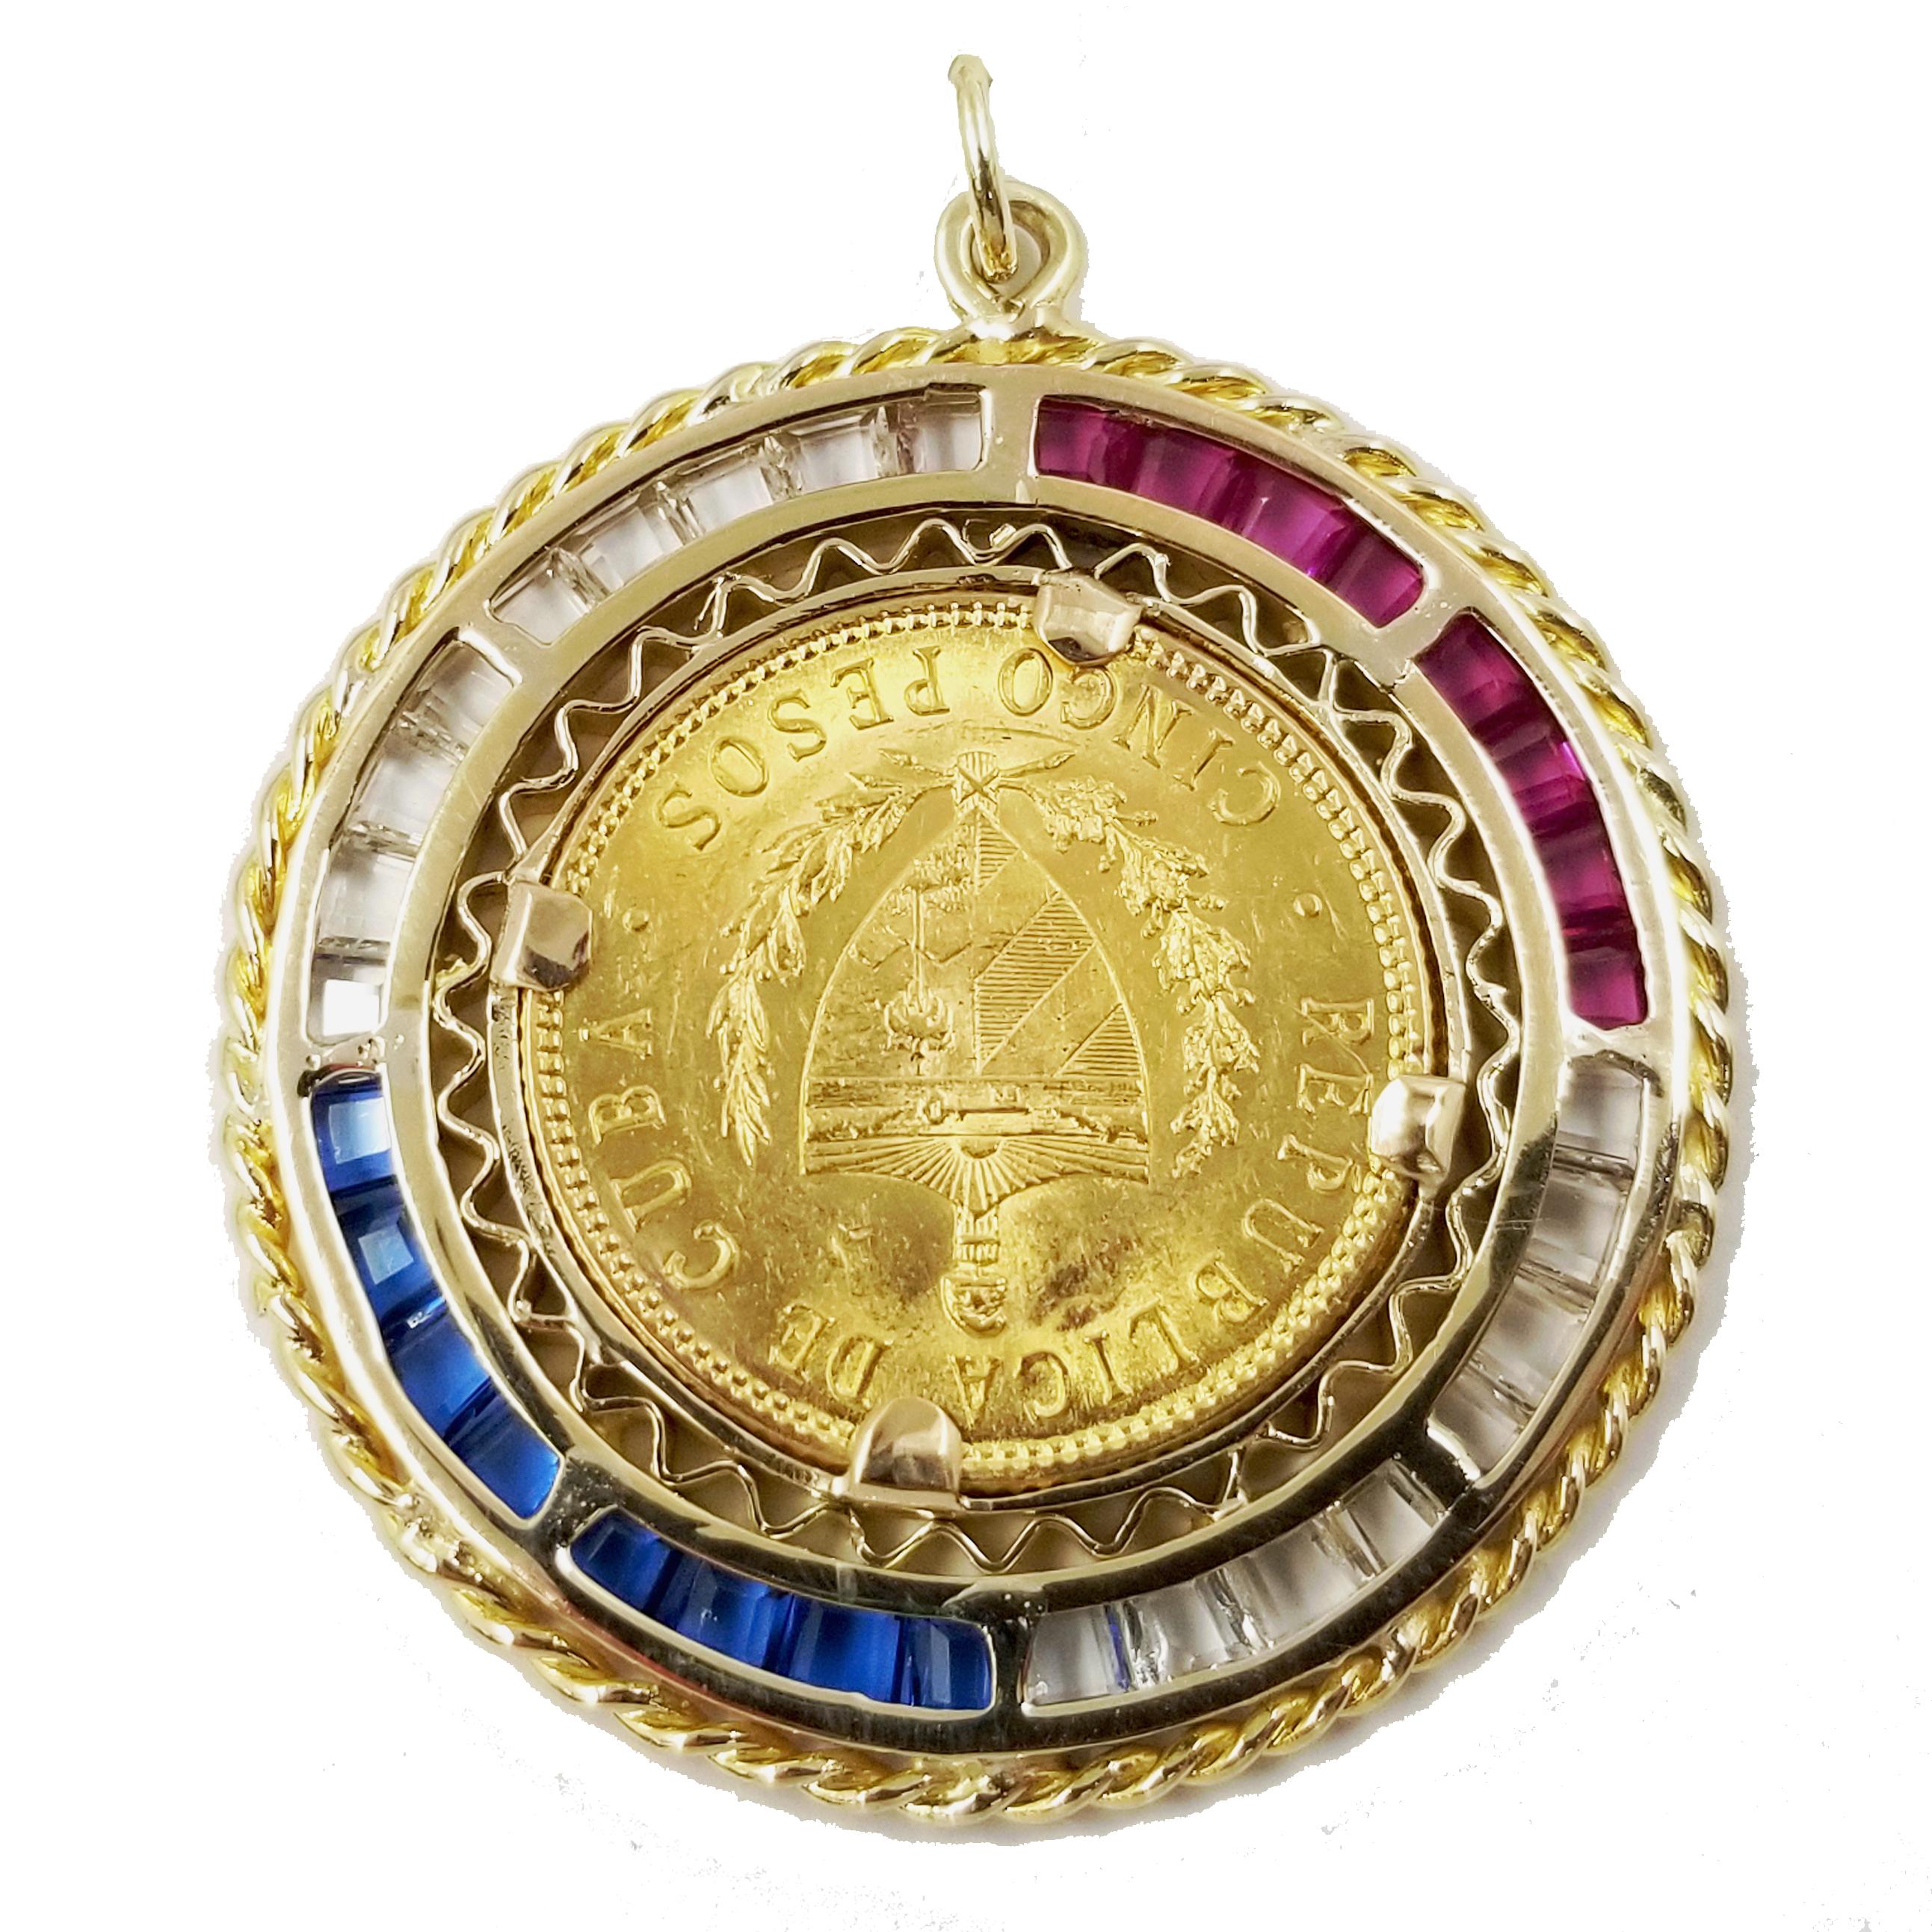 22 Karat Yellow Gold Cuban 5 Peso Coin from 1916 Set in an 18 Karat Yellow Gold Frame with Specialty Cut Synthetic Sapphires. Rope Design on Exterior.  Finished Weight is 17.3 Grams.